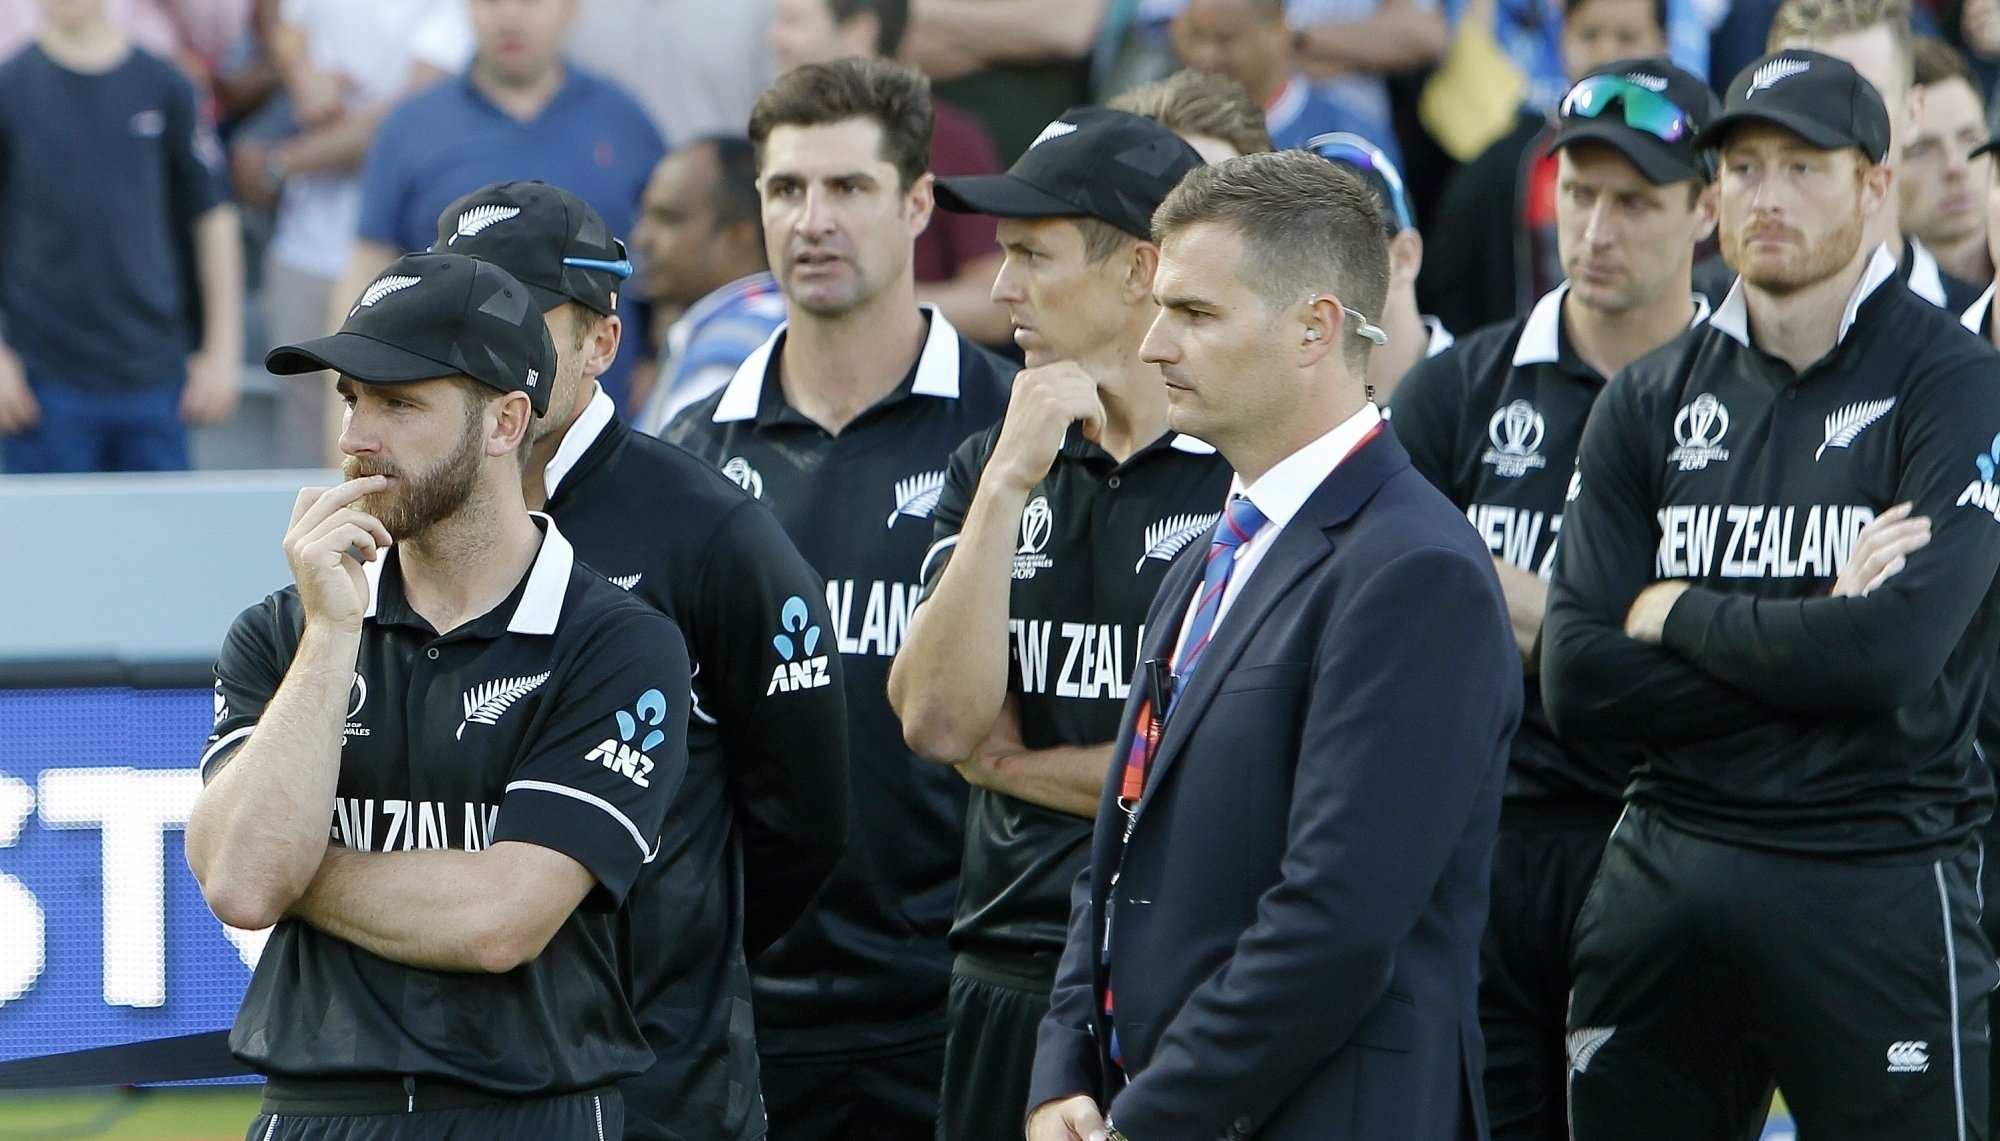 New Zealand left heart broken with the final outcome | Getty Images